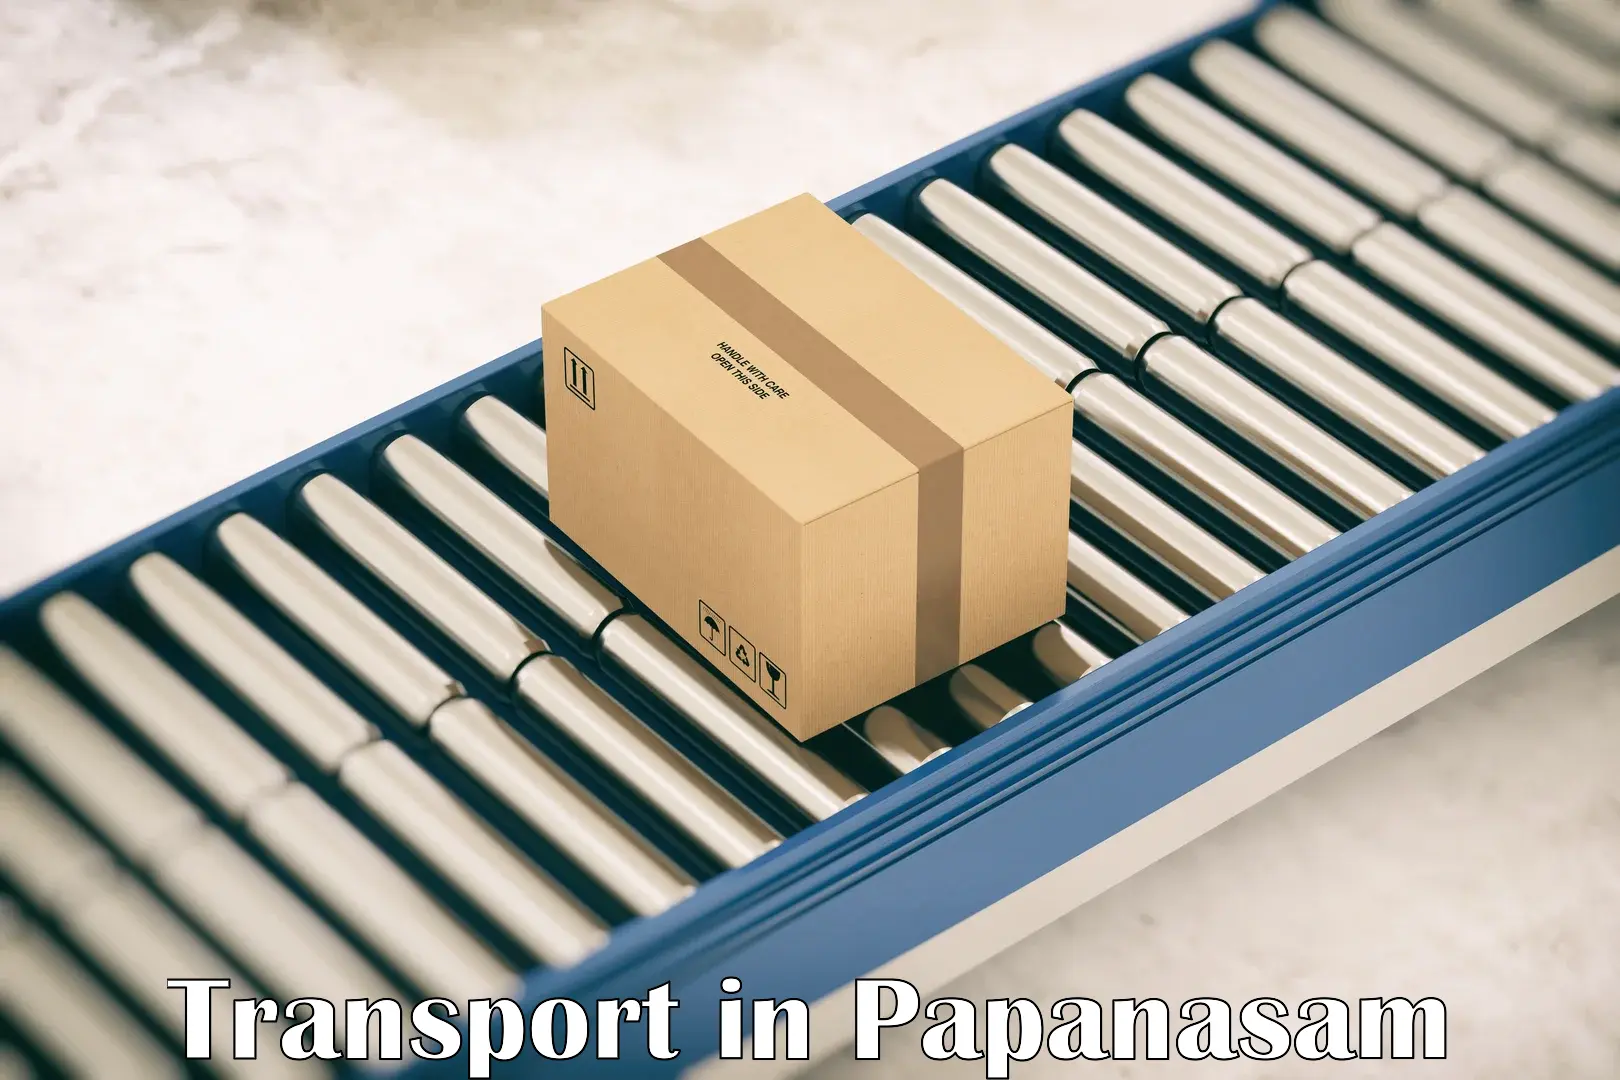 Daily parcel service transport in Papanasam